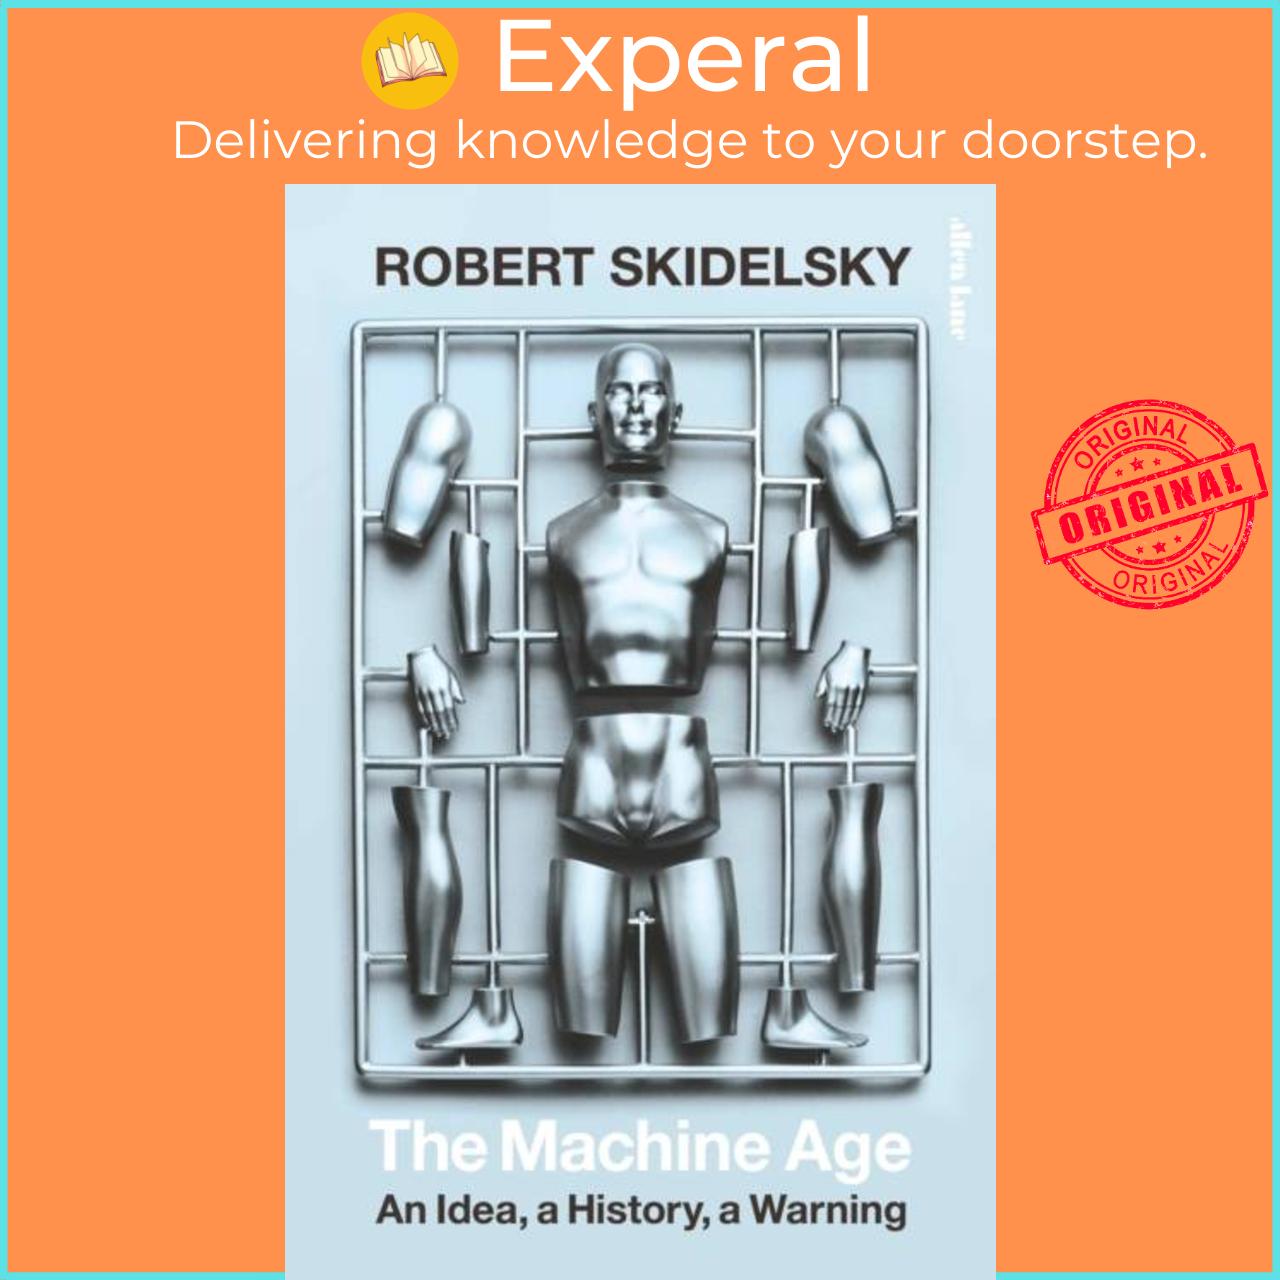 Sách - The Machine Age - An Idea, a History, a Warning by Robert Skidelsky (UK edition, hardcover)